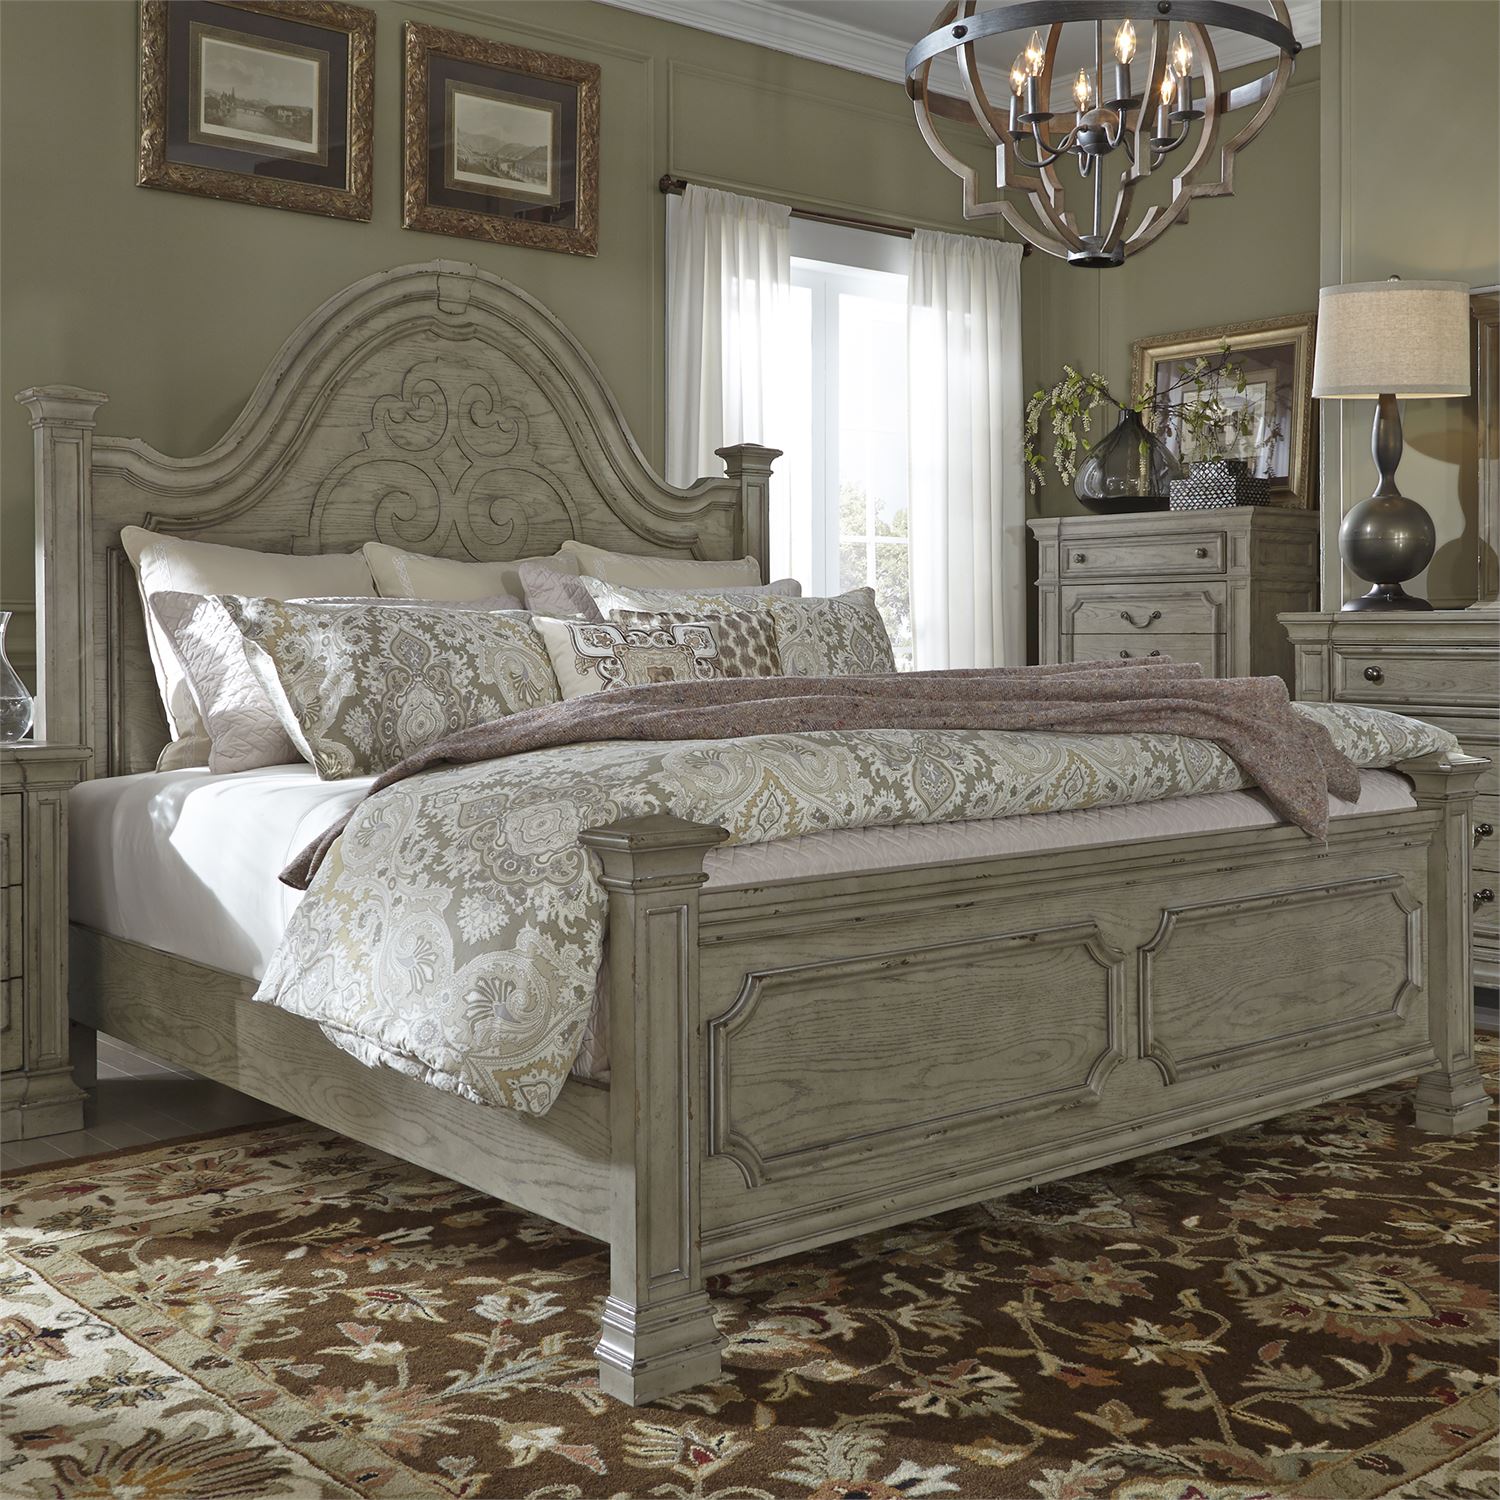 4 piece bedroom set in Gray Taupe with Brown Rub Finish